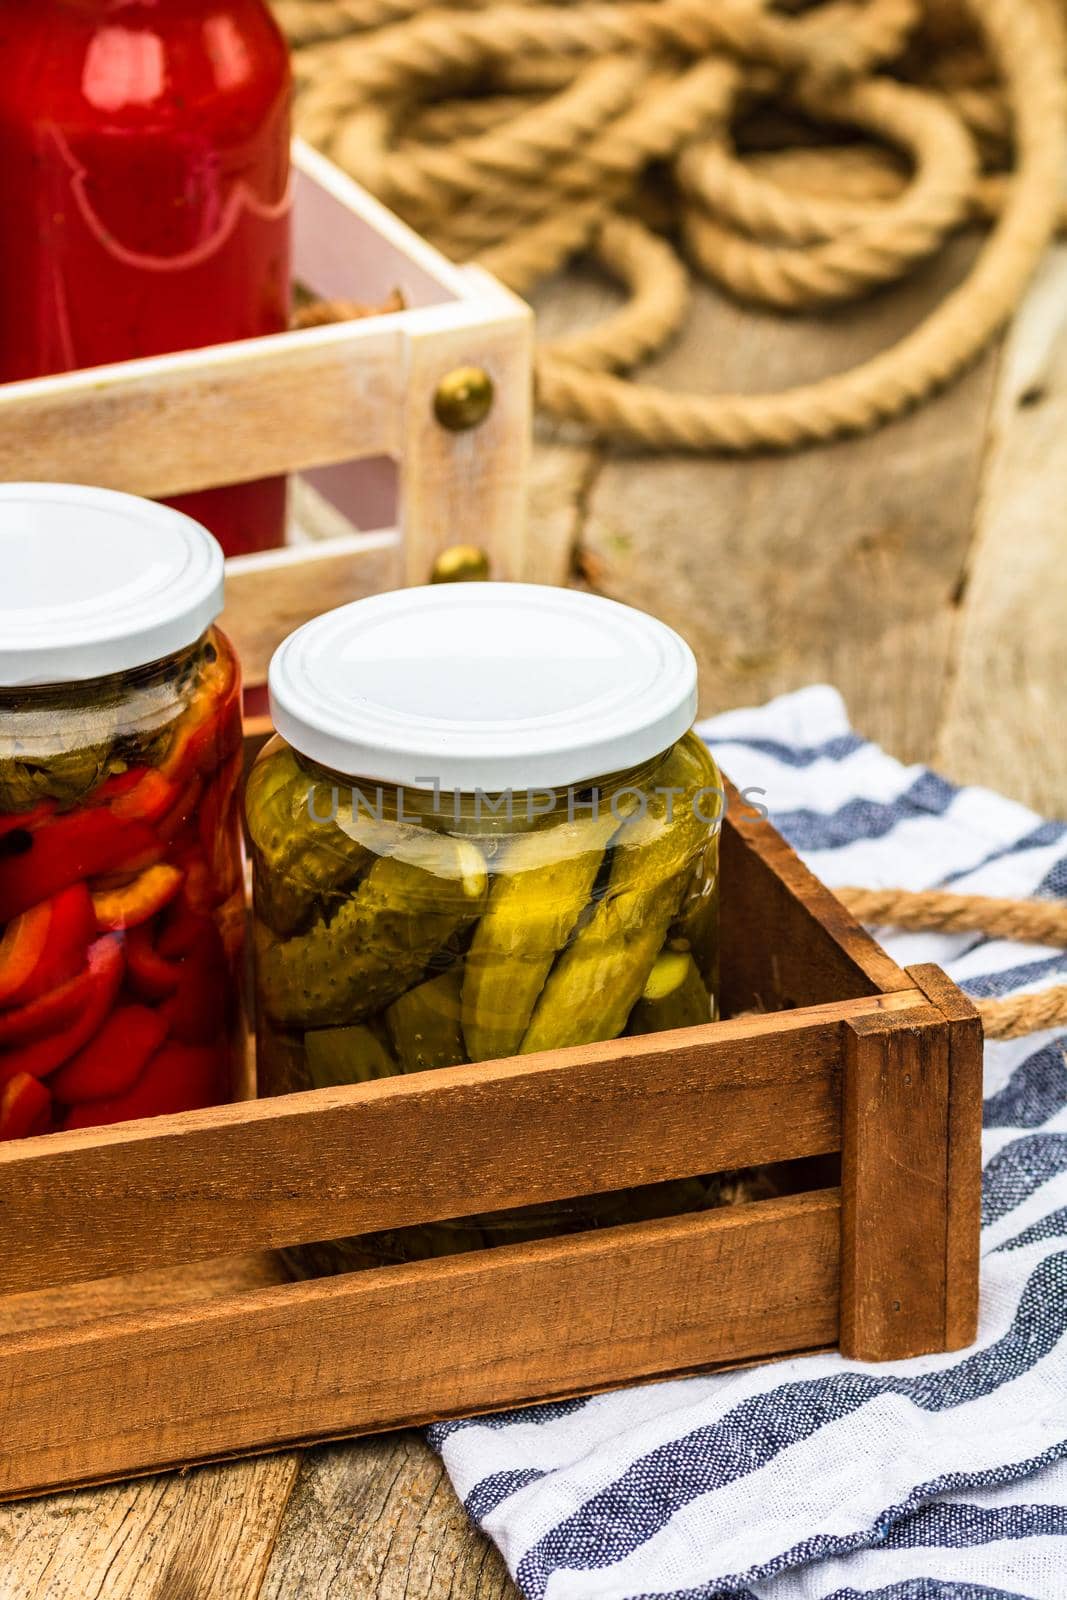 Wooden crate with glass jars with pickled red bell peppers and pickled cucumbers (pickles) isolated. Jars with variety of pickled vegetables. Preserved food concept in a rustic composition.